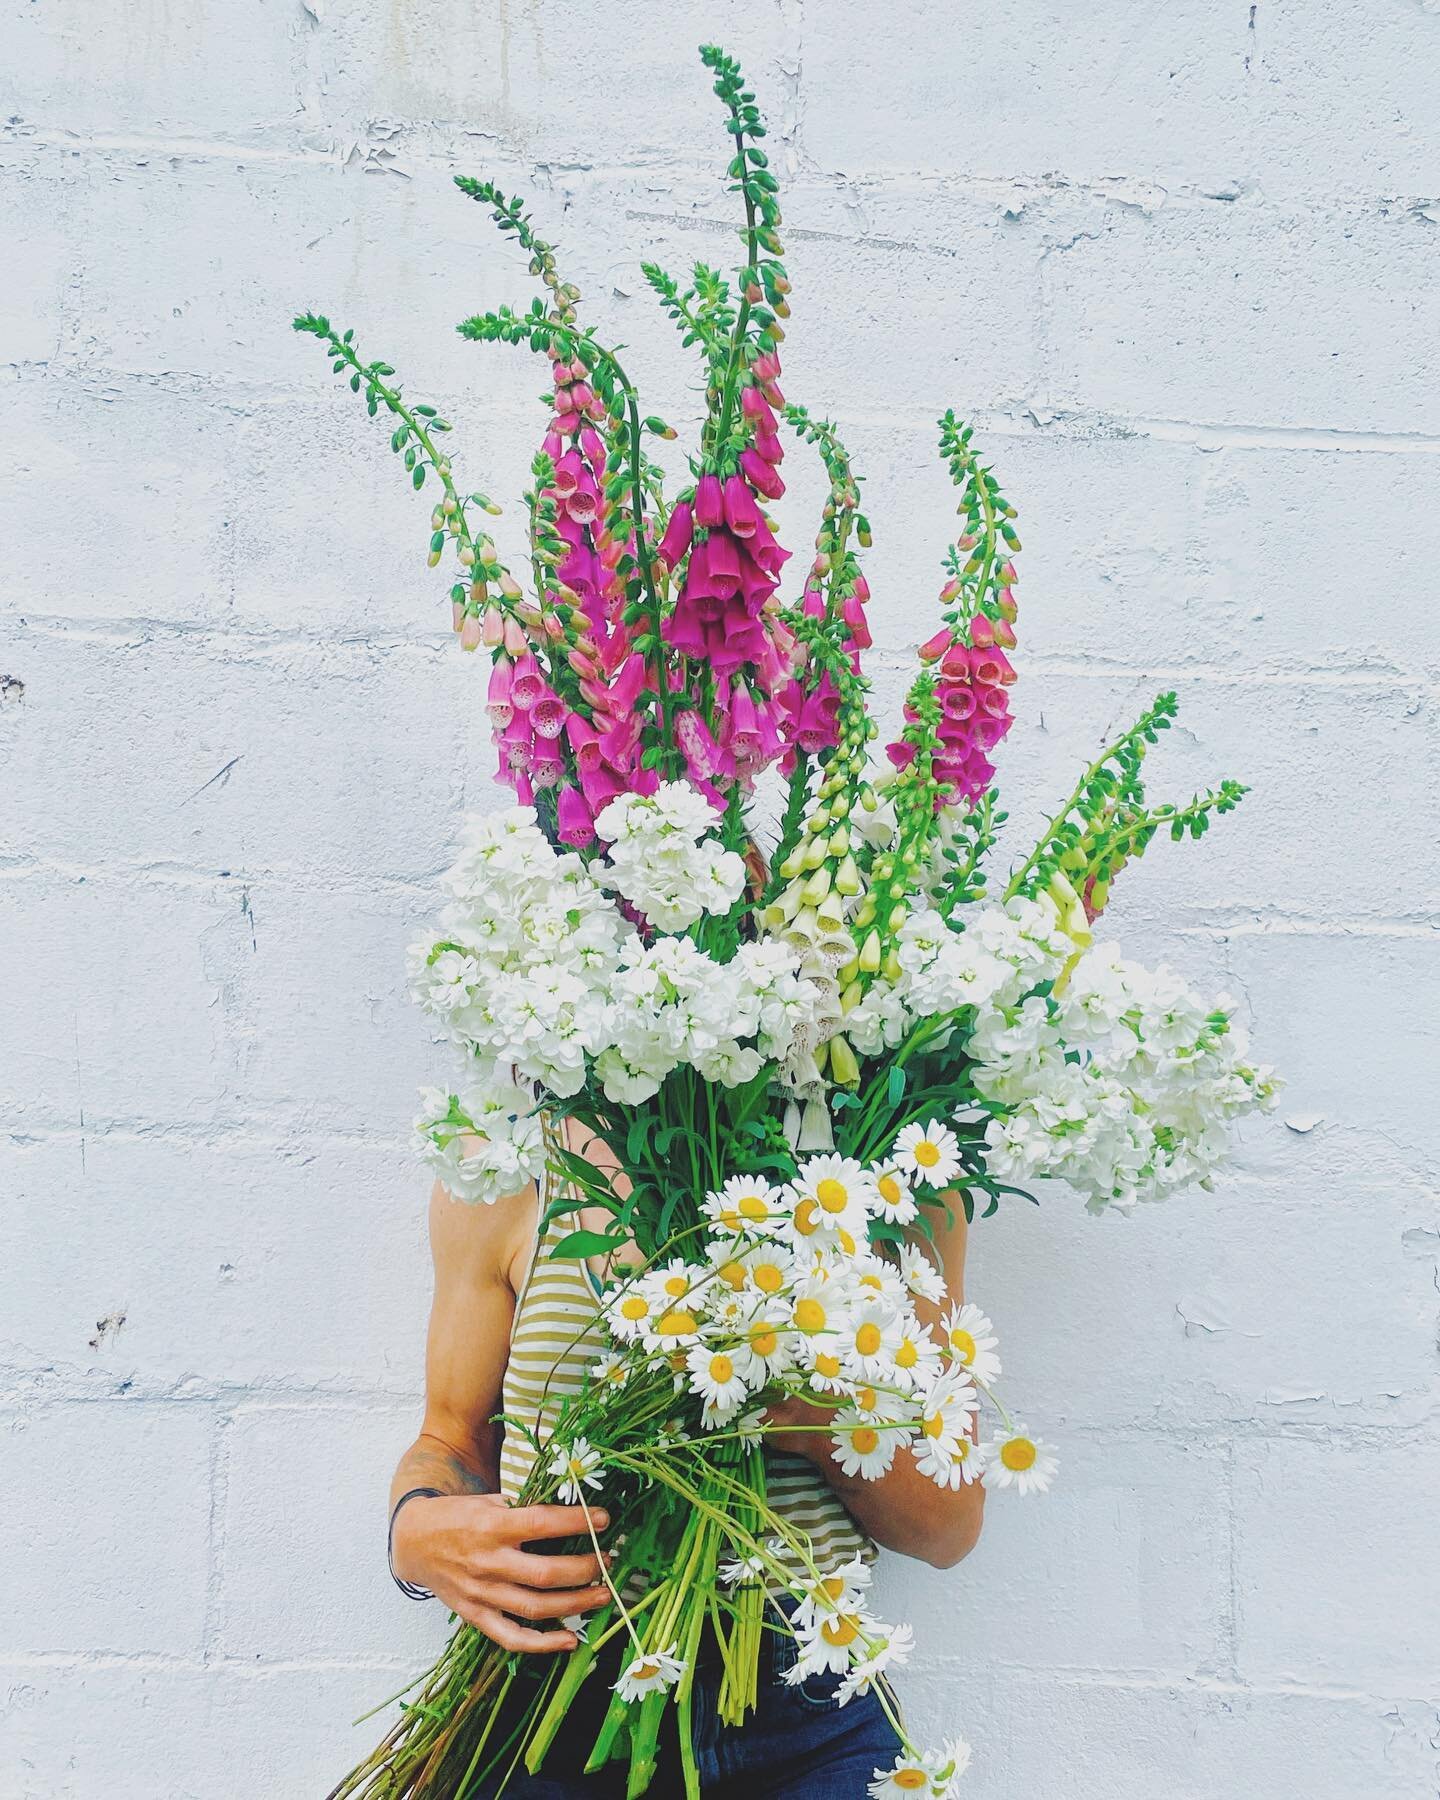 Been laying low on the gram. Busy in the fields, busy in my head, but these magical meadow fairy bouquets made my heart flutter. Available all weekend @wtdiner. 
Ups, downs, highs and lows. Thank you friends and fam who have been holding me, and lift